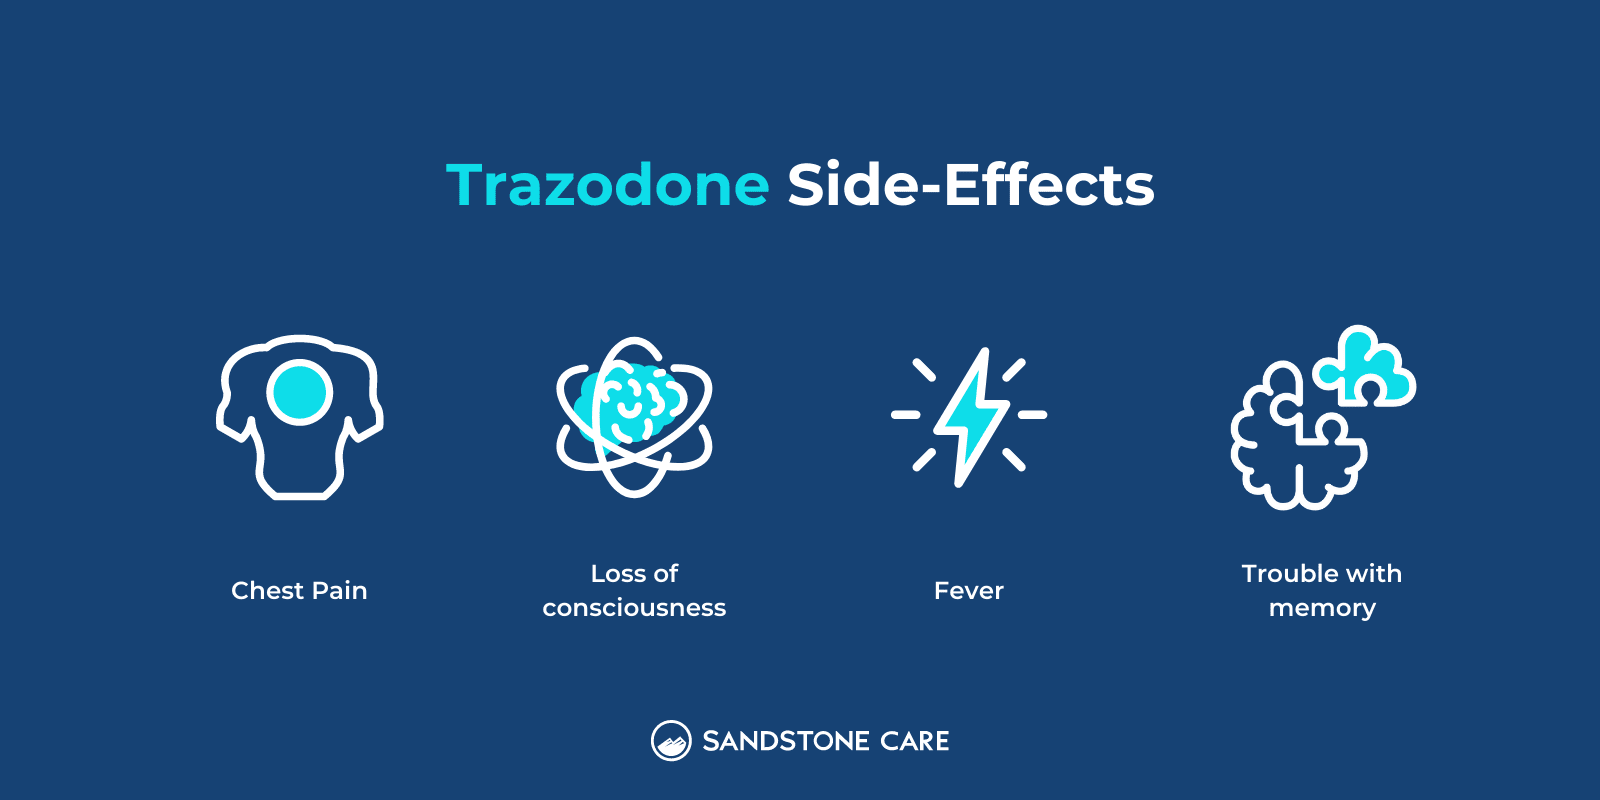 Trazodone Side-Effects illustrated with relevant icons for chest pain, loos of consciousness, fever, trouble with memory